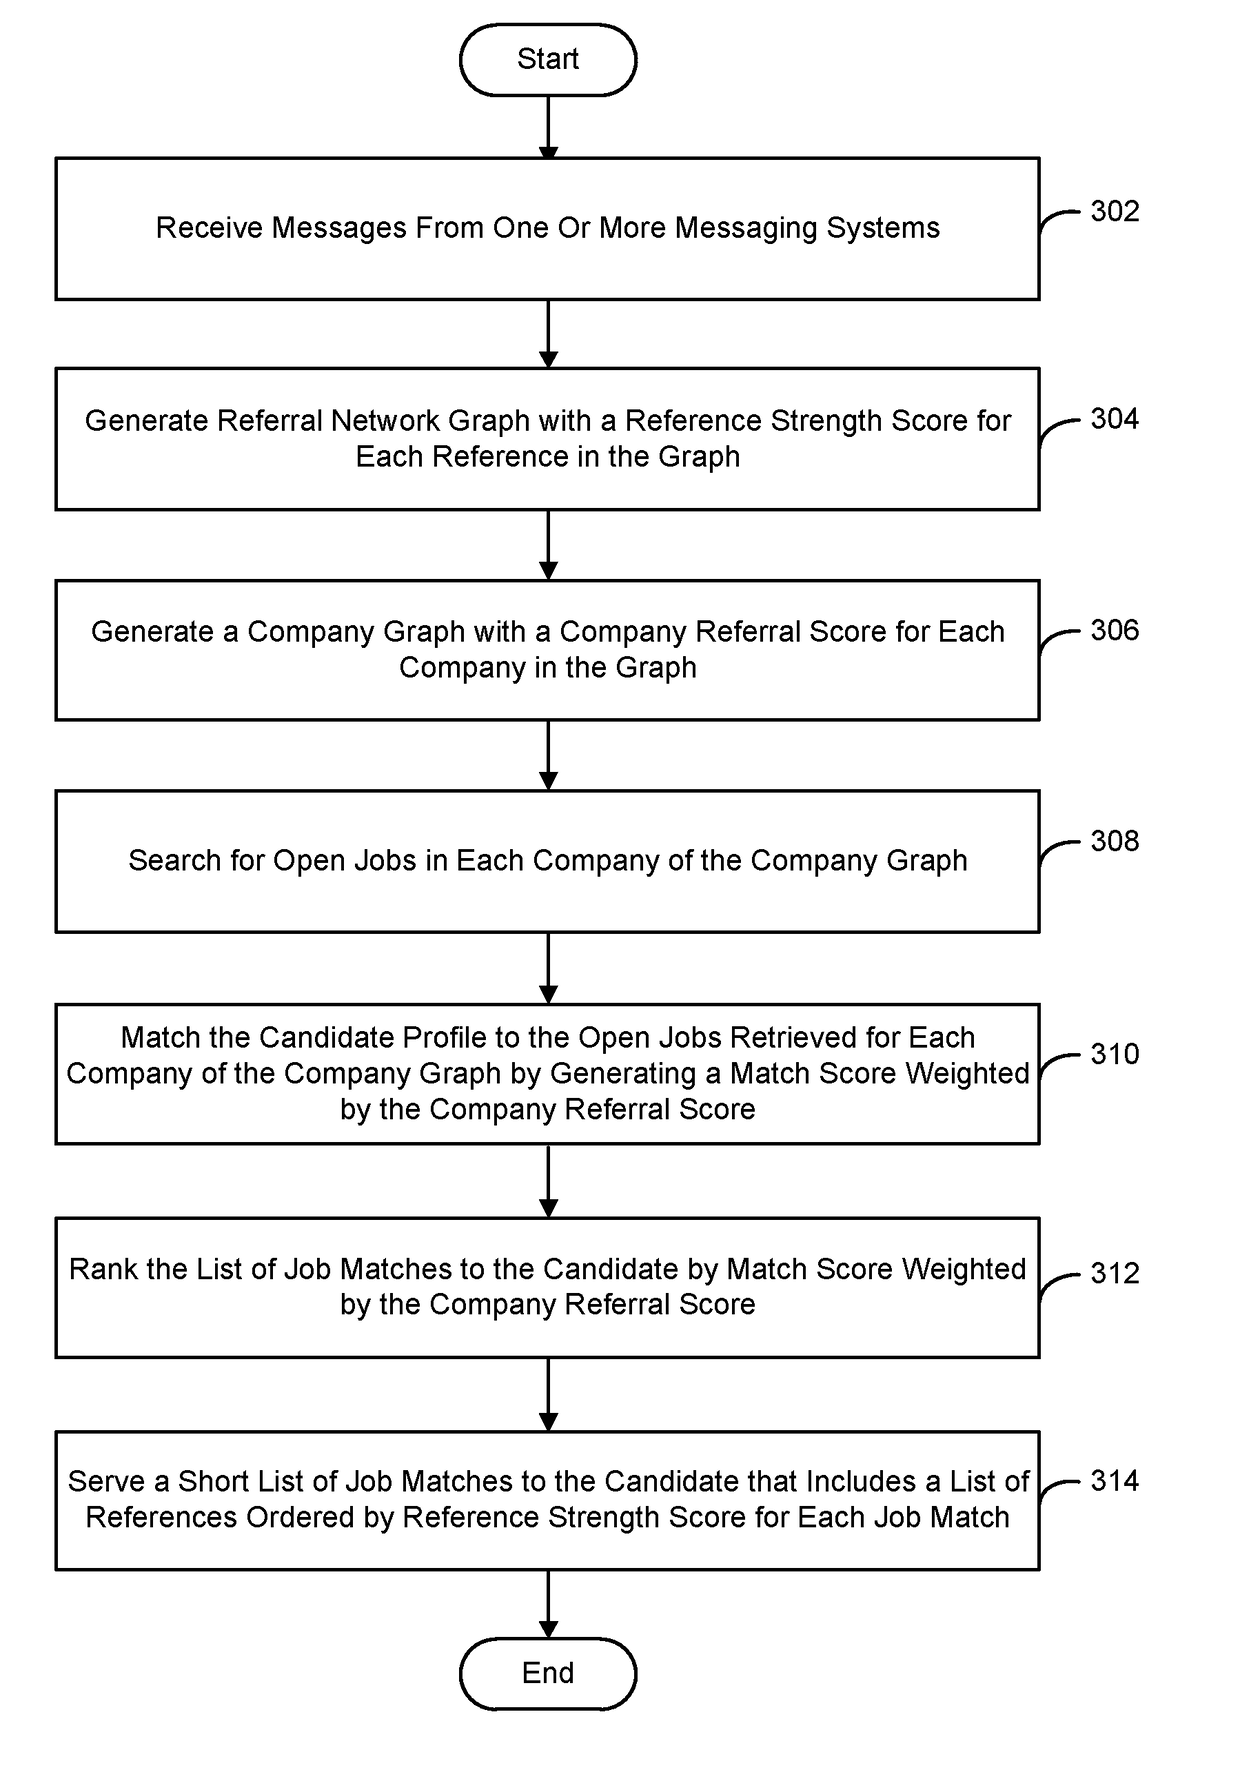 System and method for data mining messaging systems to discover references to companies with job opportunities matching a candidate